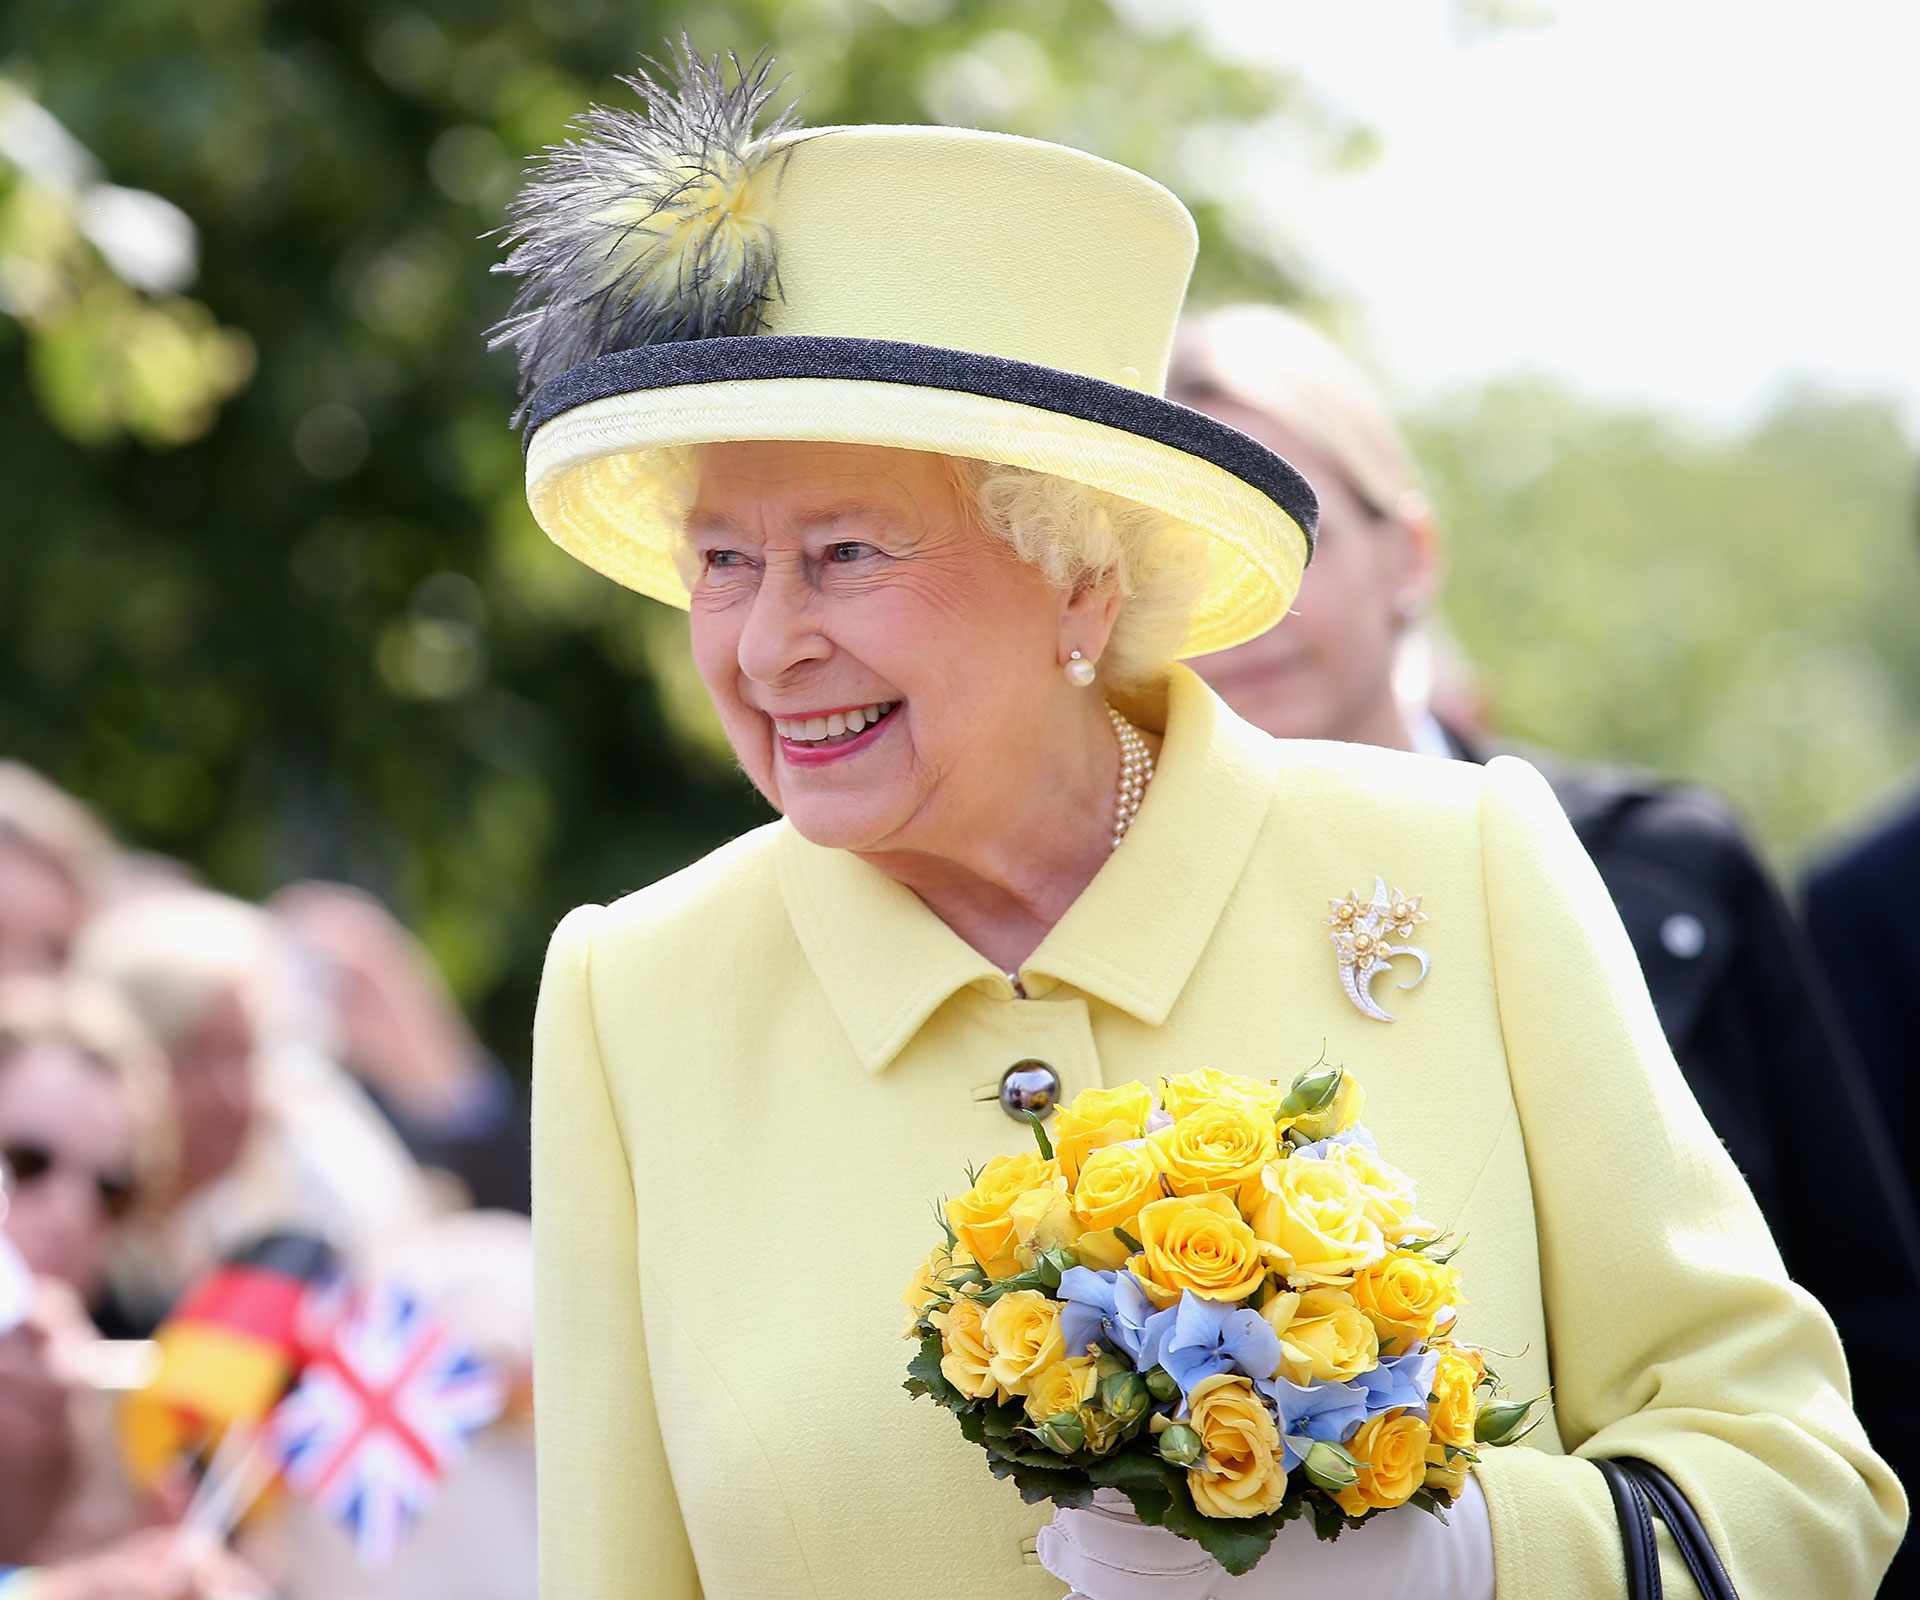 Long live her Majesty! The Queen is still leading by example, after nearly 64 years she is Britain’s longest serving monarch.